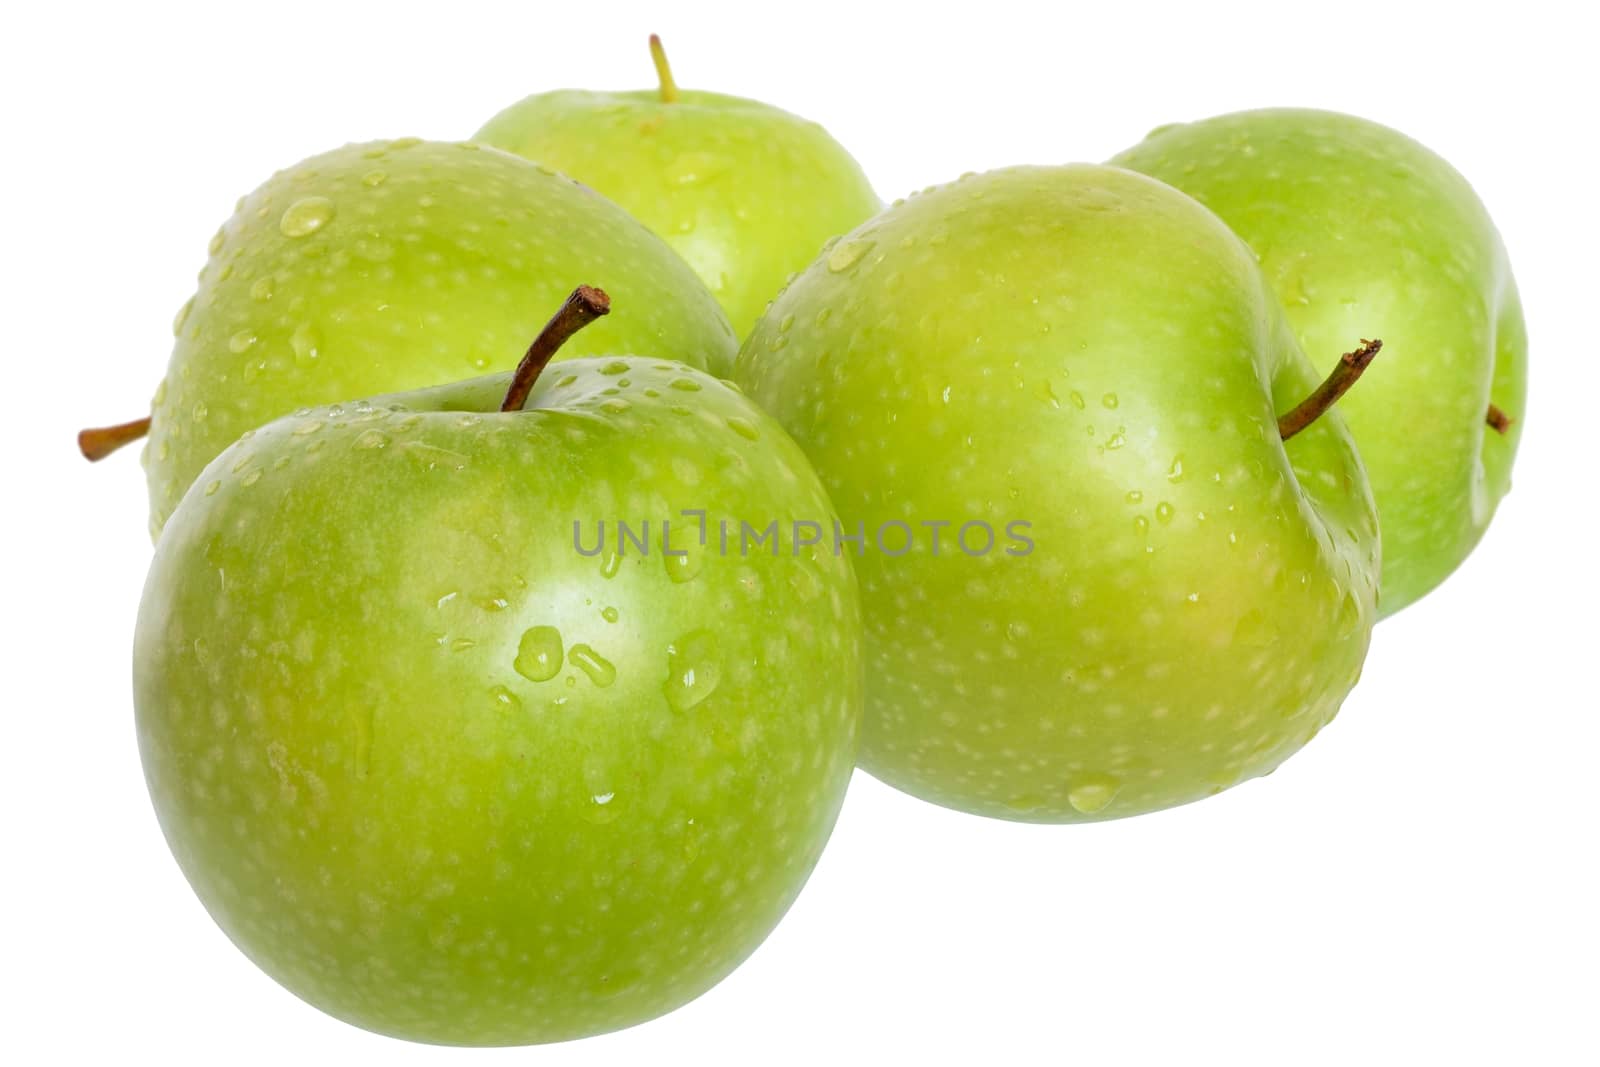 Green apple stack on a white background.